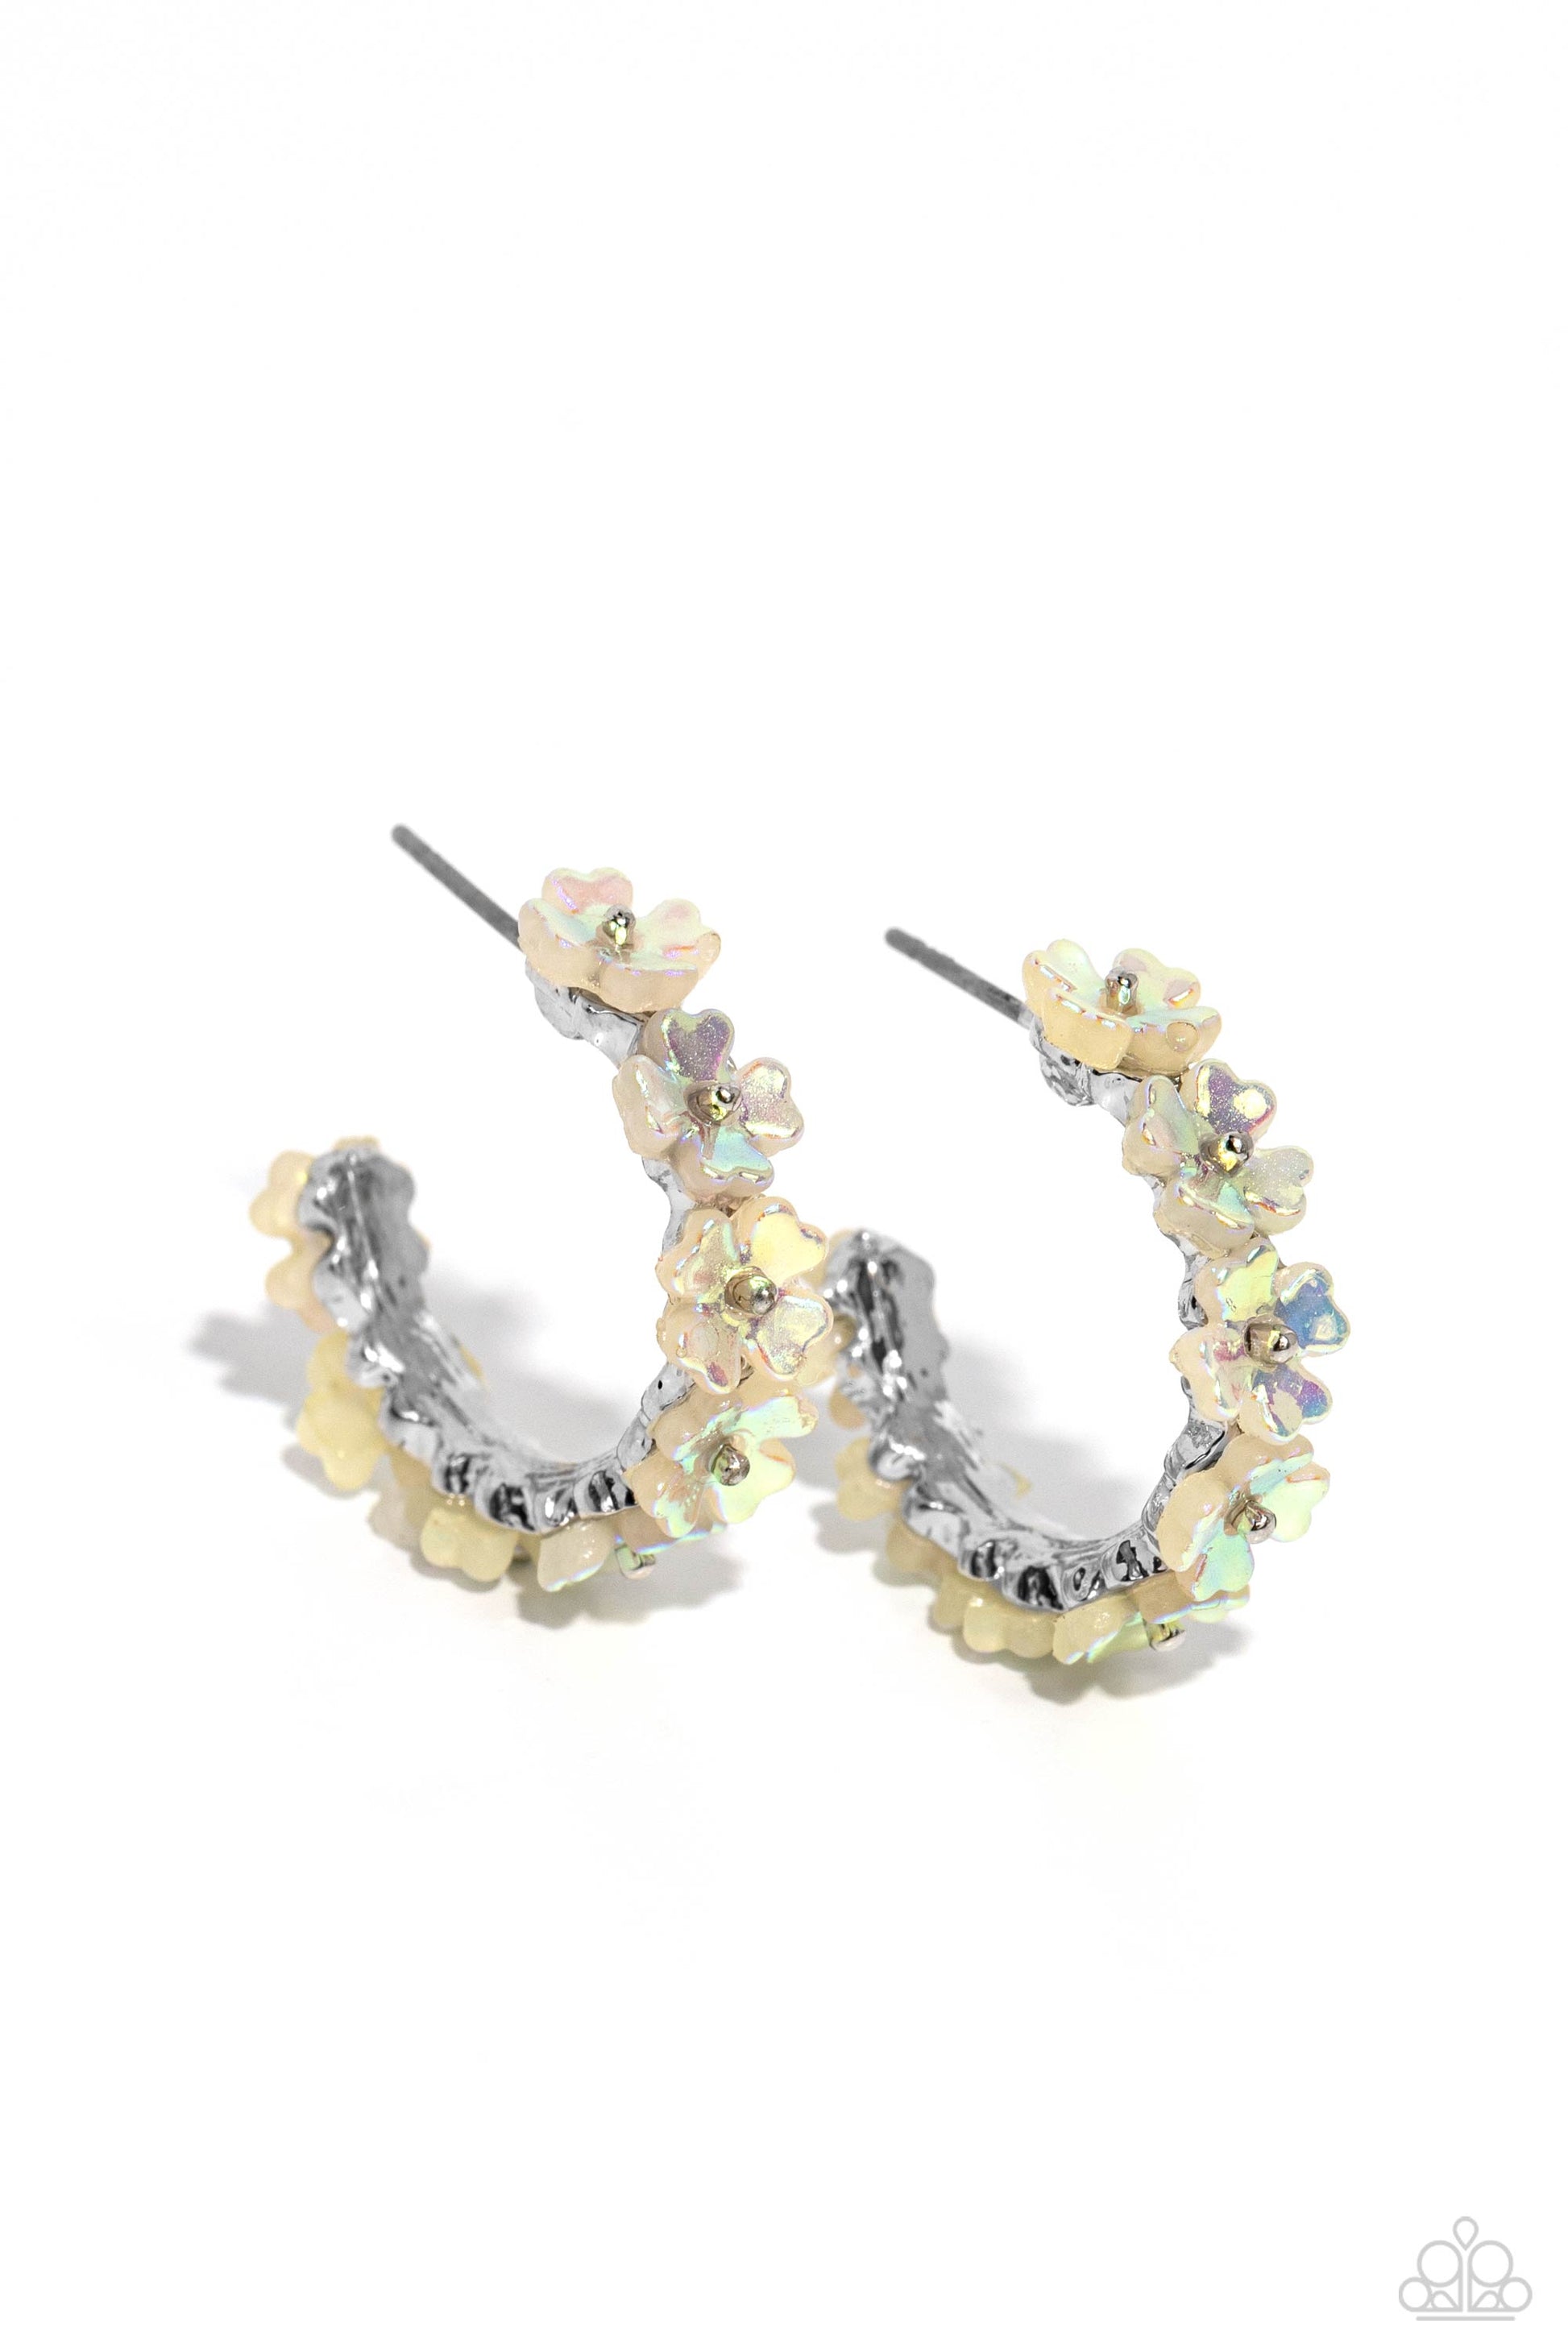 Floral Focus White Hoop Earring - Paparazzi Accessories  Tiny white iridescent flowers connect to one another as they wrap around the ear to create a charming, dainty hoop. Earring attaches to a standard post fitting. Hoop measures approximately 3/4" in diameter. Due to its prismatic palette, color may vary.  Sold as one pair of hoop earrings.  P5HO-WTXX-149XX